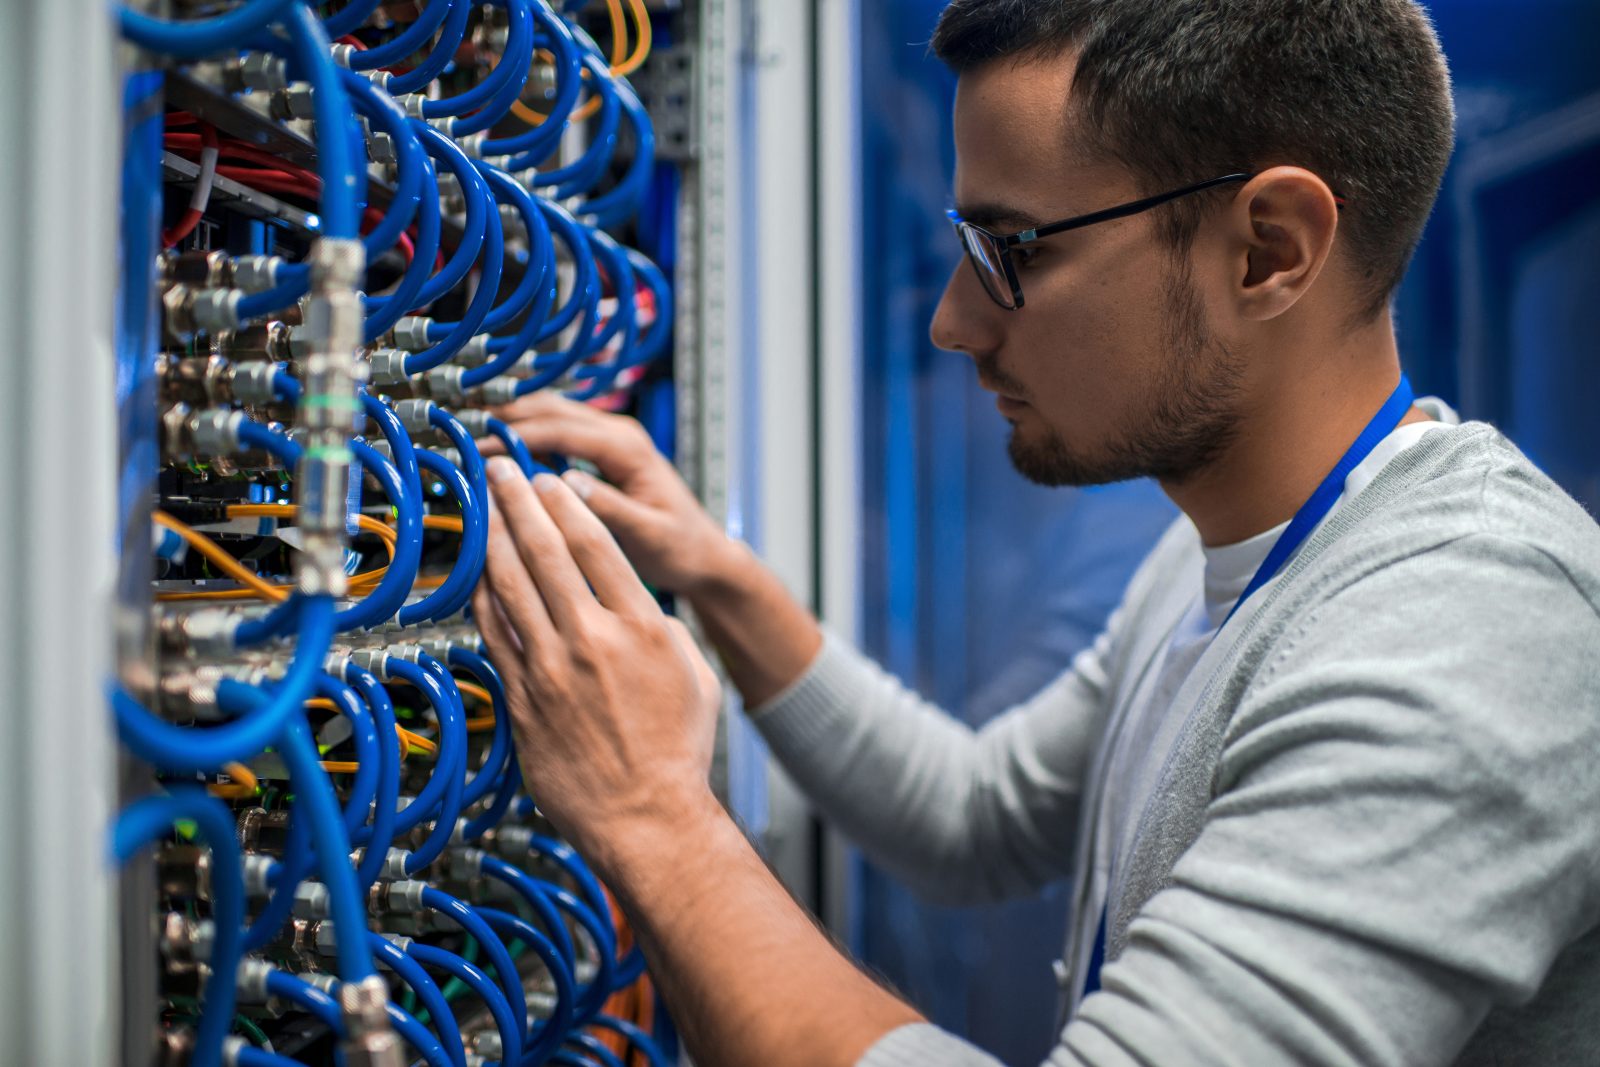 A man in a white t-shirt, gray sweater, blue lanyard, and glasses adjusts the blue cables of a server rack